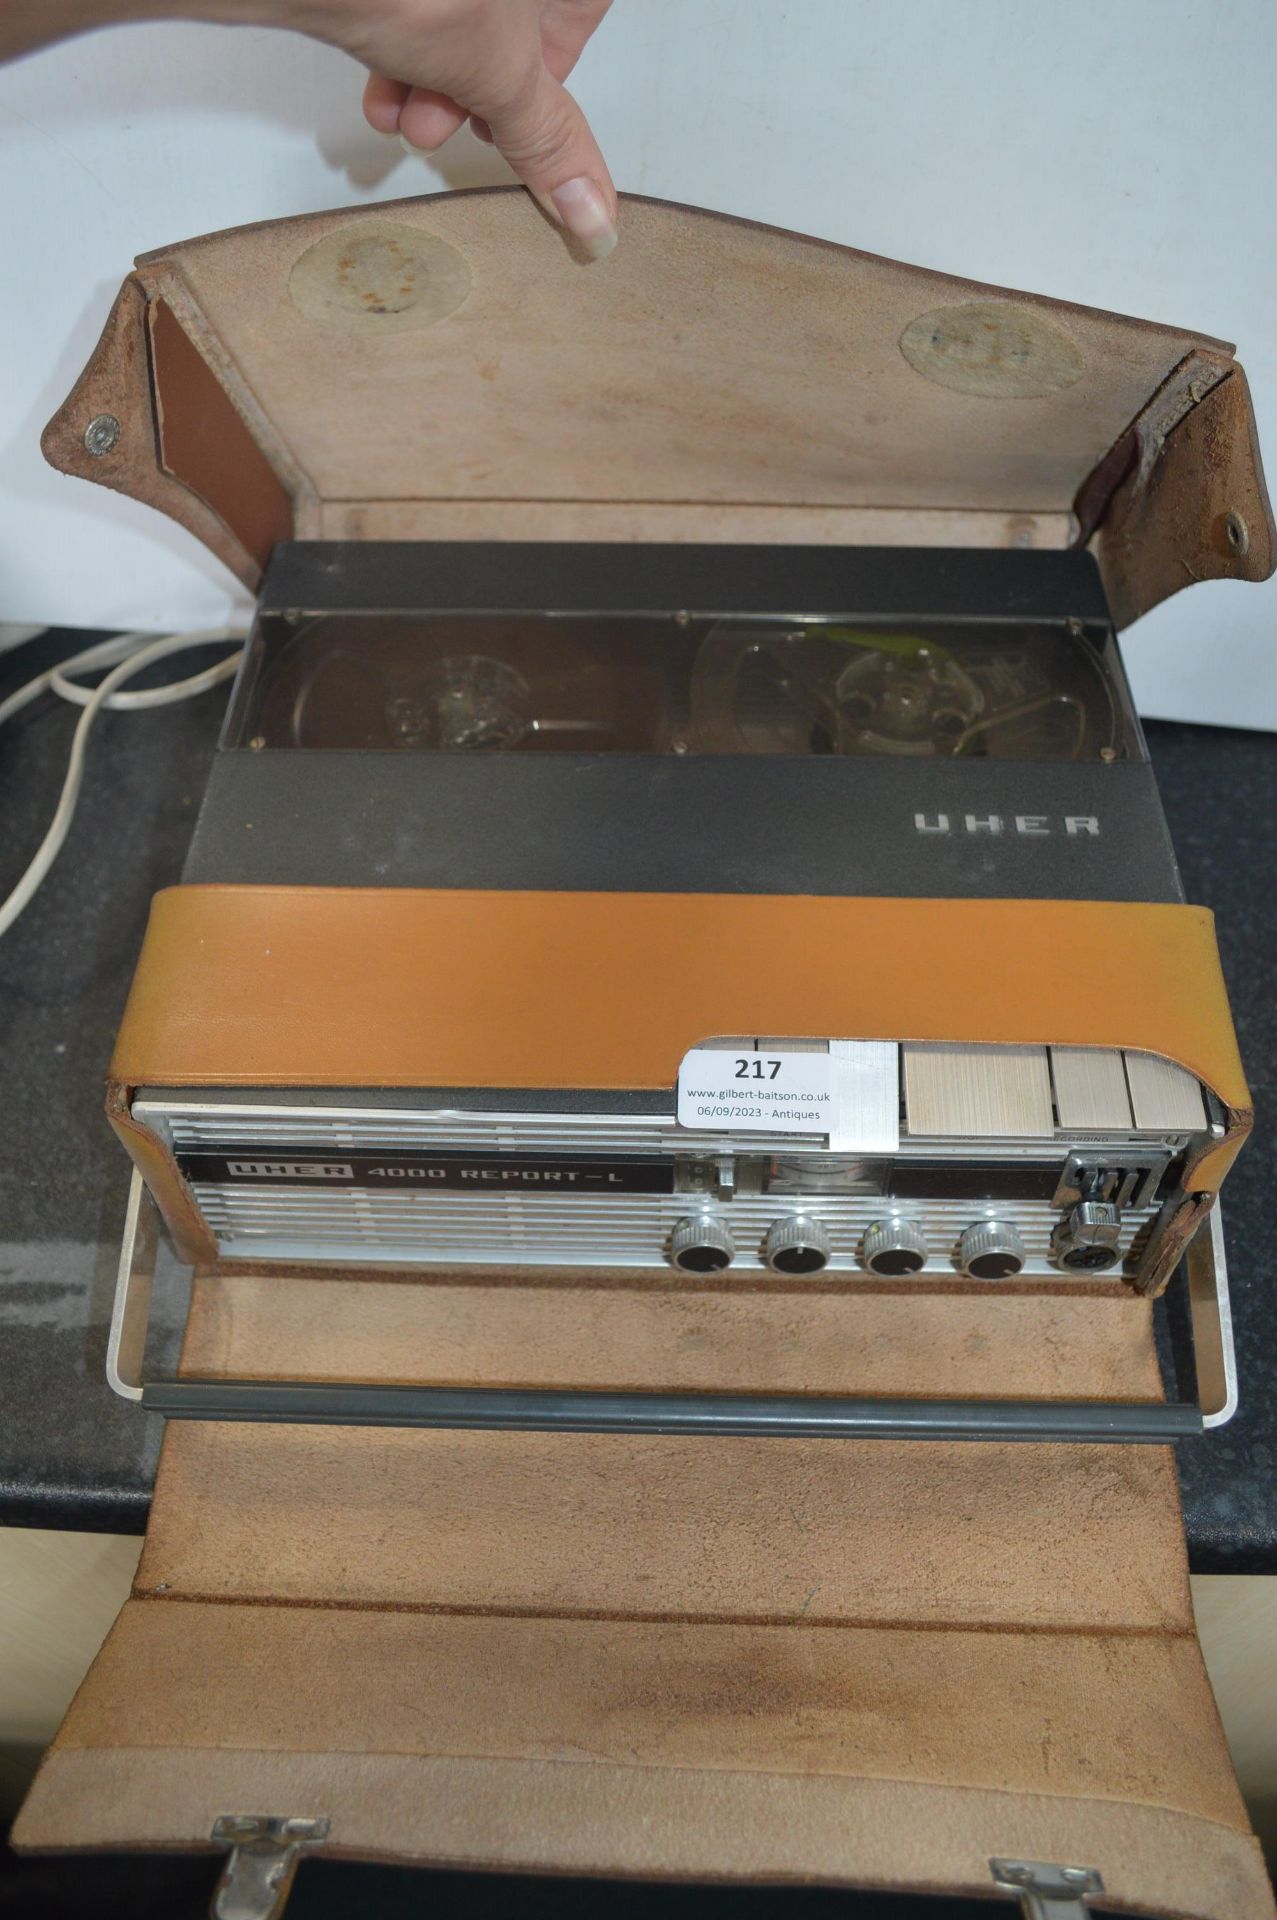 Uher 4000 Report-L Reel-to-Reel Tape Recorder - Image 2 of 2